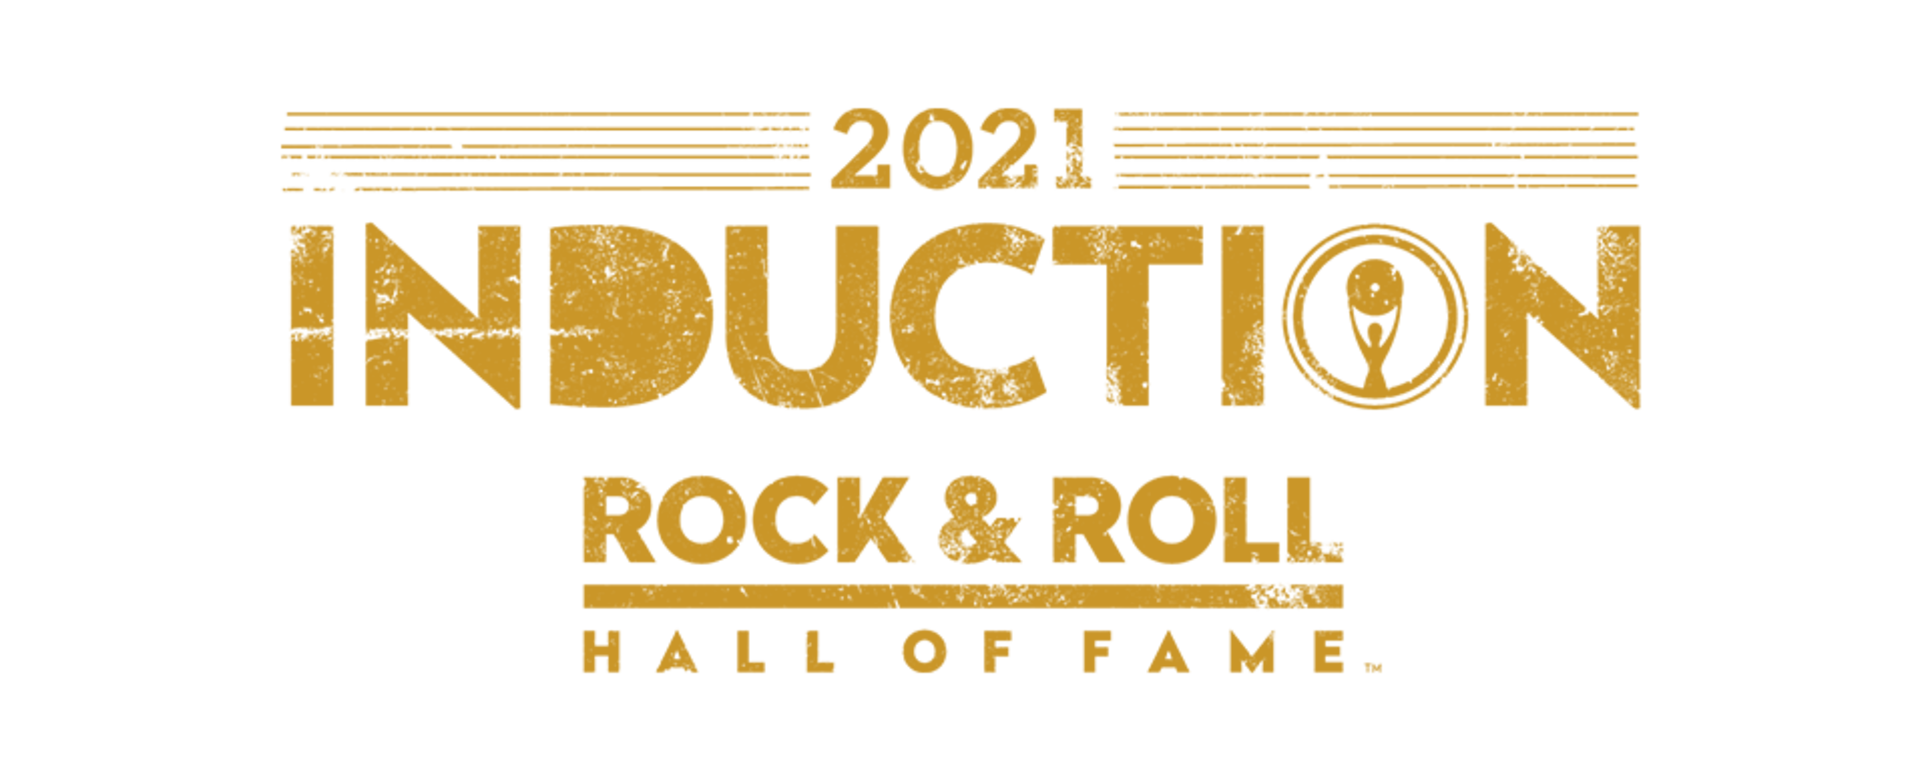 How to Watch the 2021 Rock & Roll Hall of Fame Induction Ceremony on Roku, Fire TV, Apple TV & More on November 20